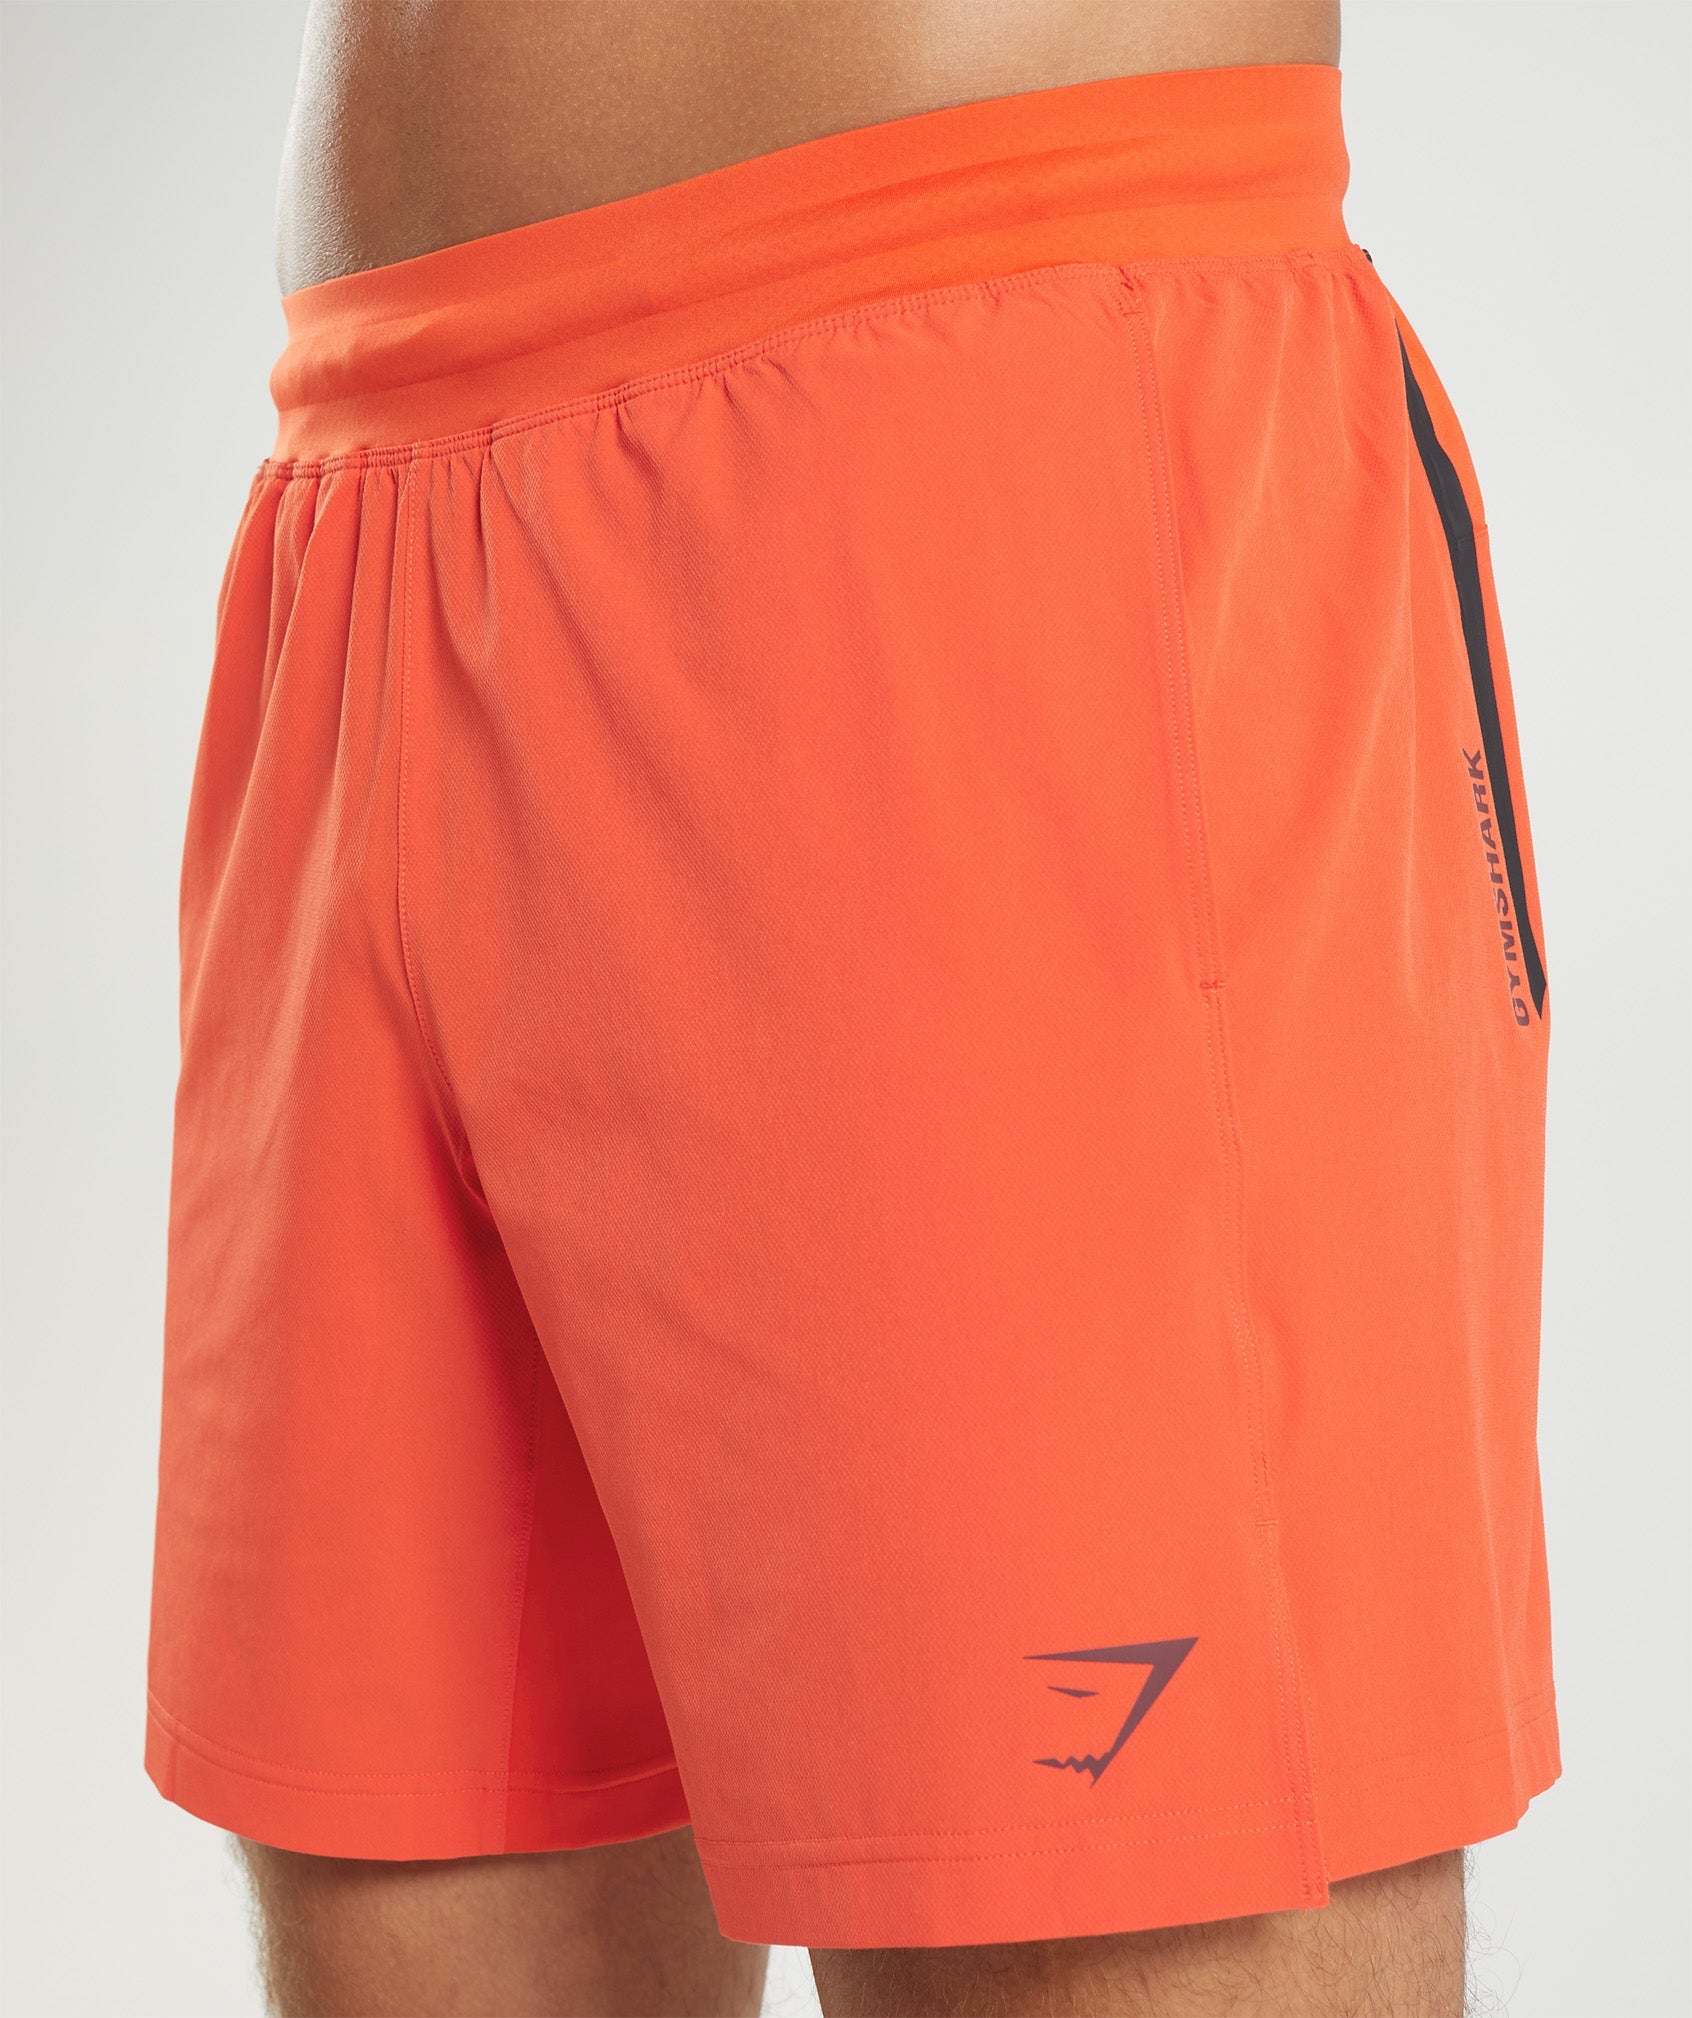 Apex 8" Function Shorts in Pepper Red - view 5